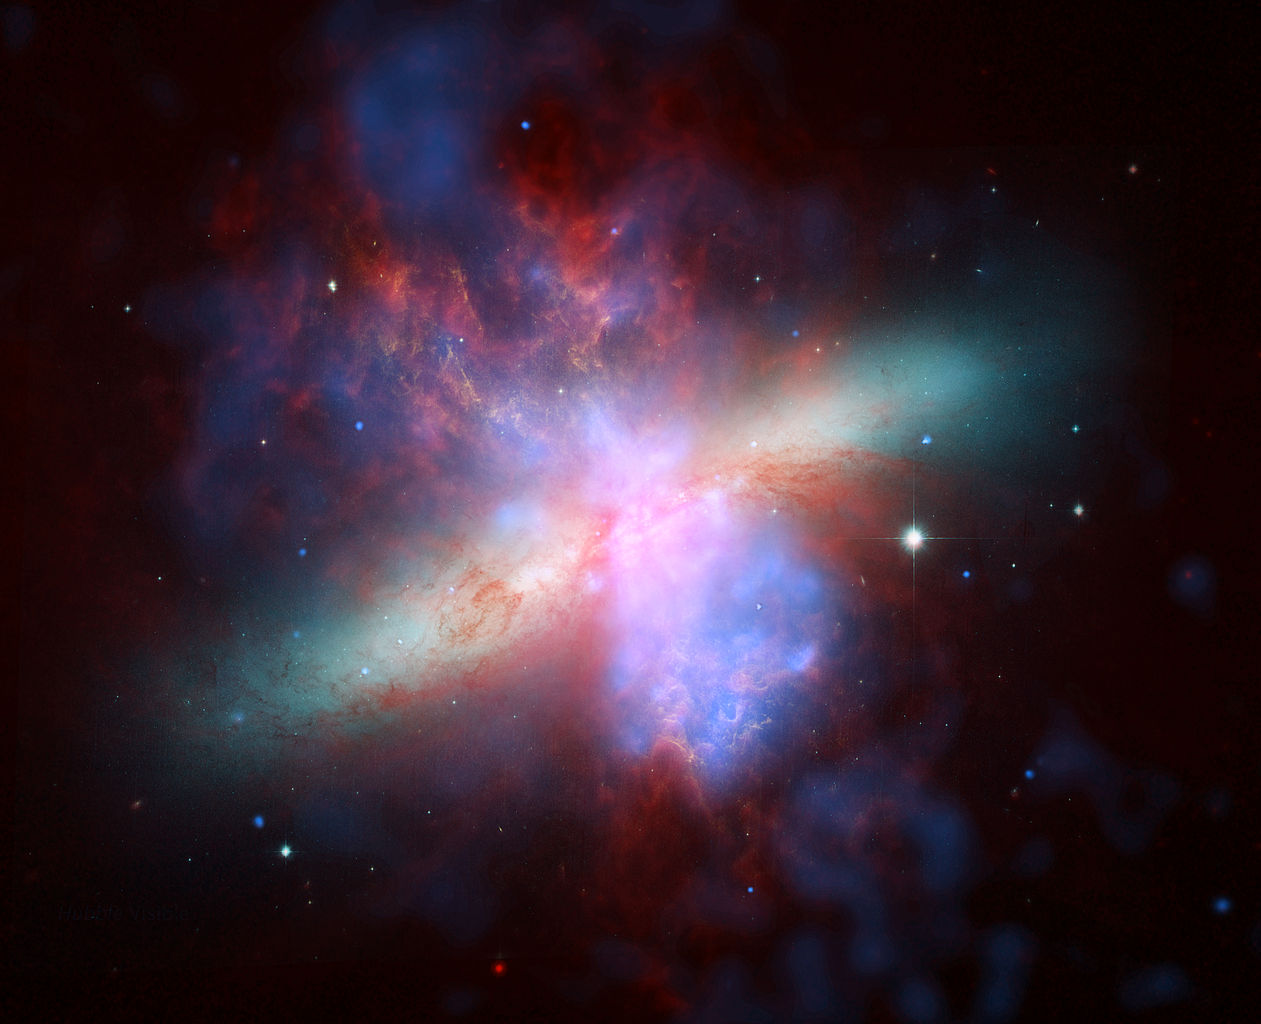 cigar galaxy composite image,m82 visible,m82 x-ray